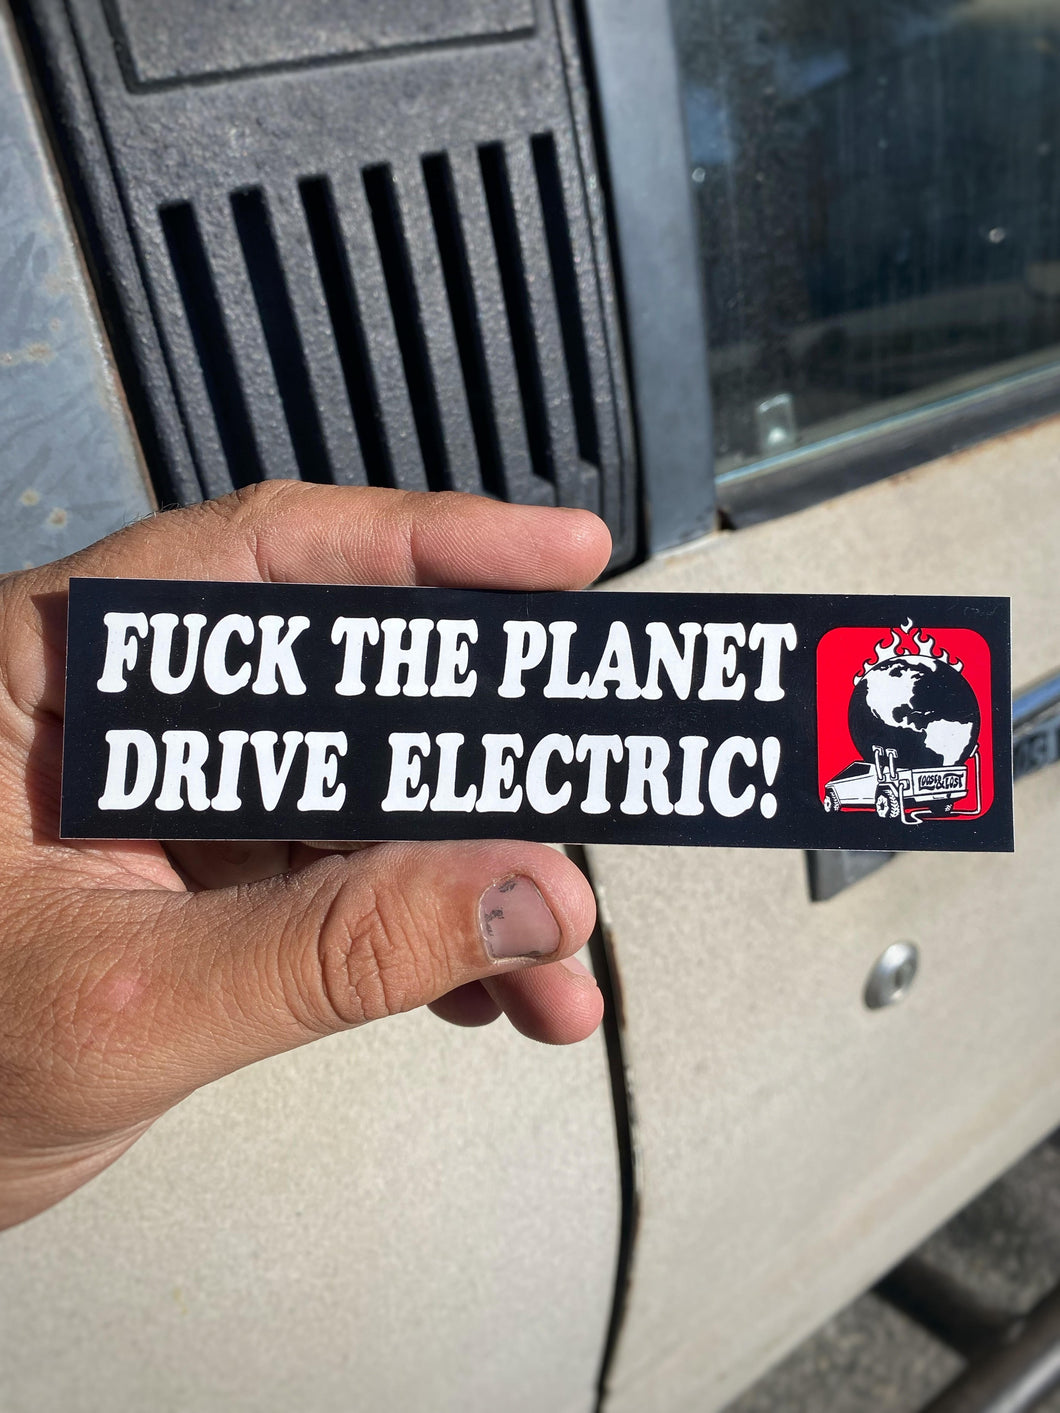 Fuck the planet drive electric - STICKER